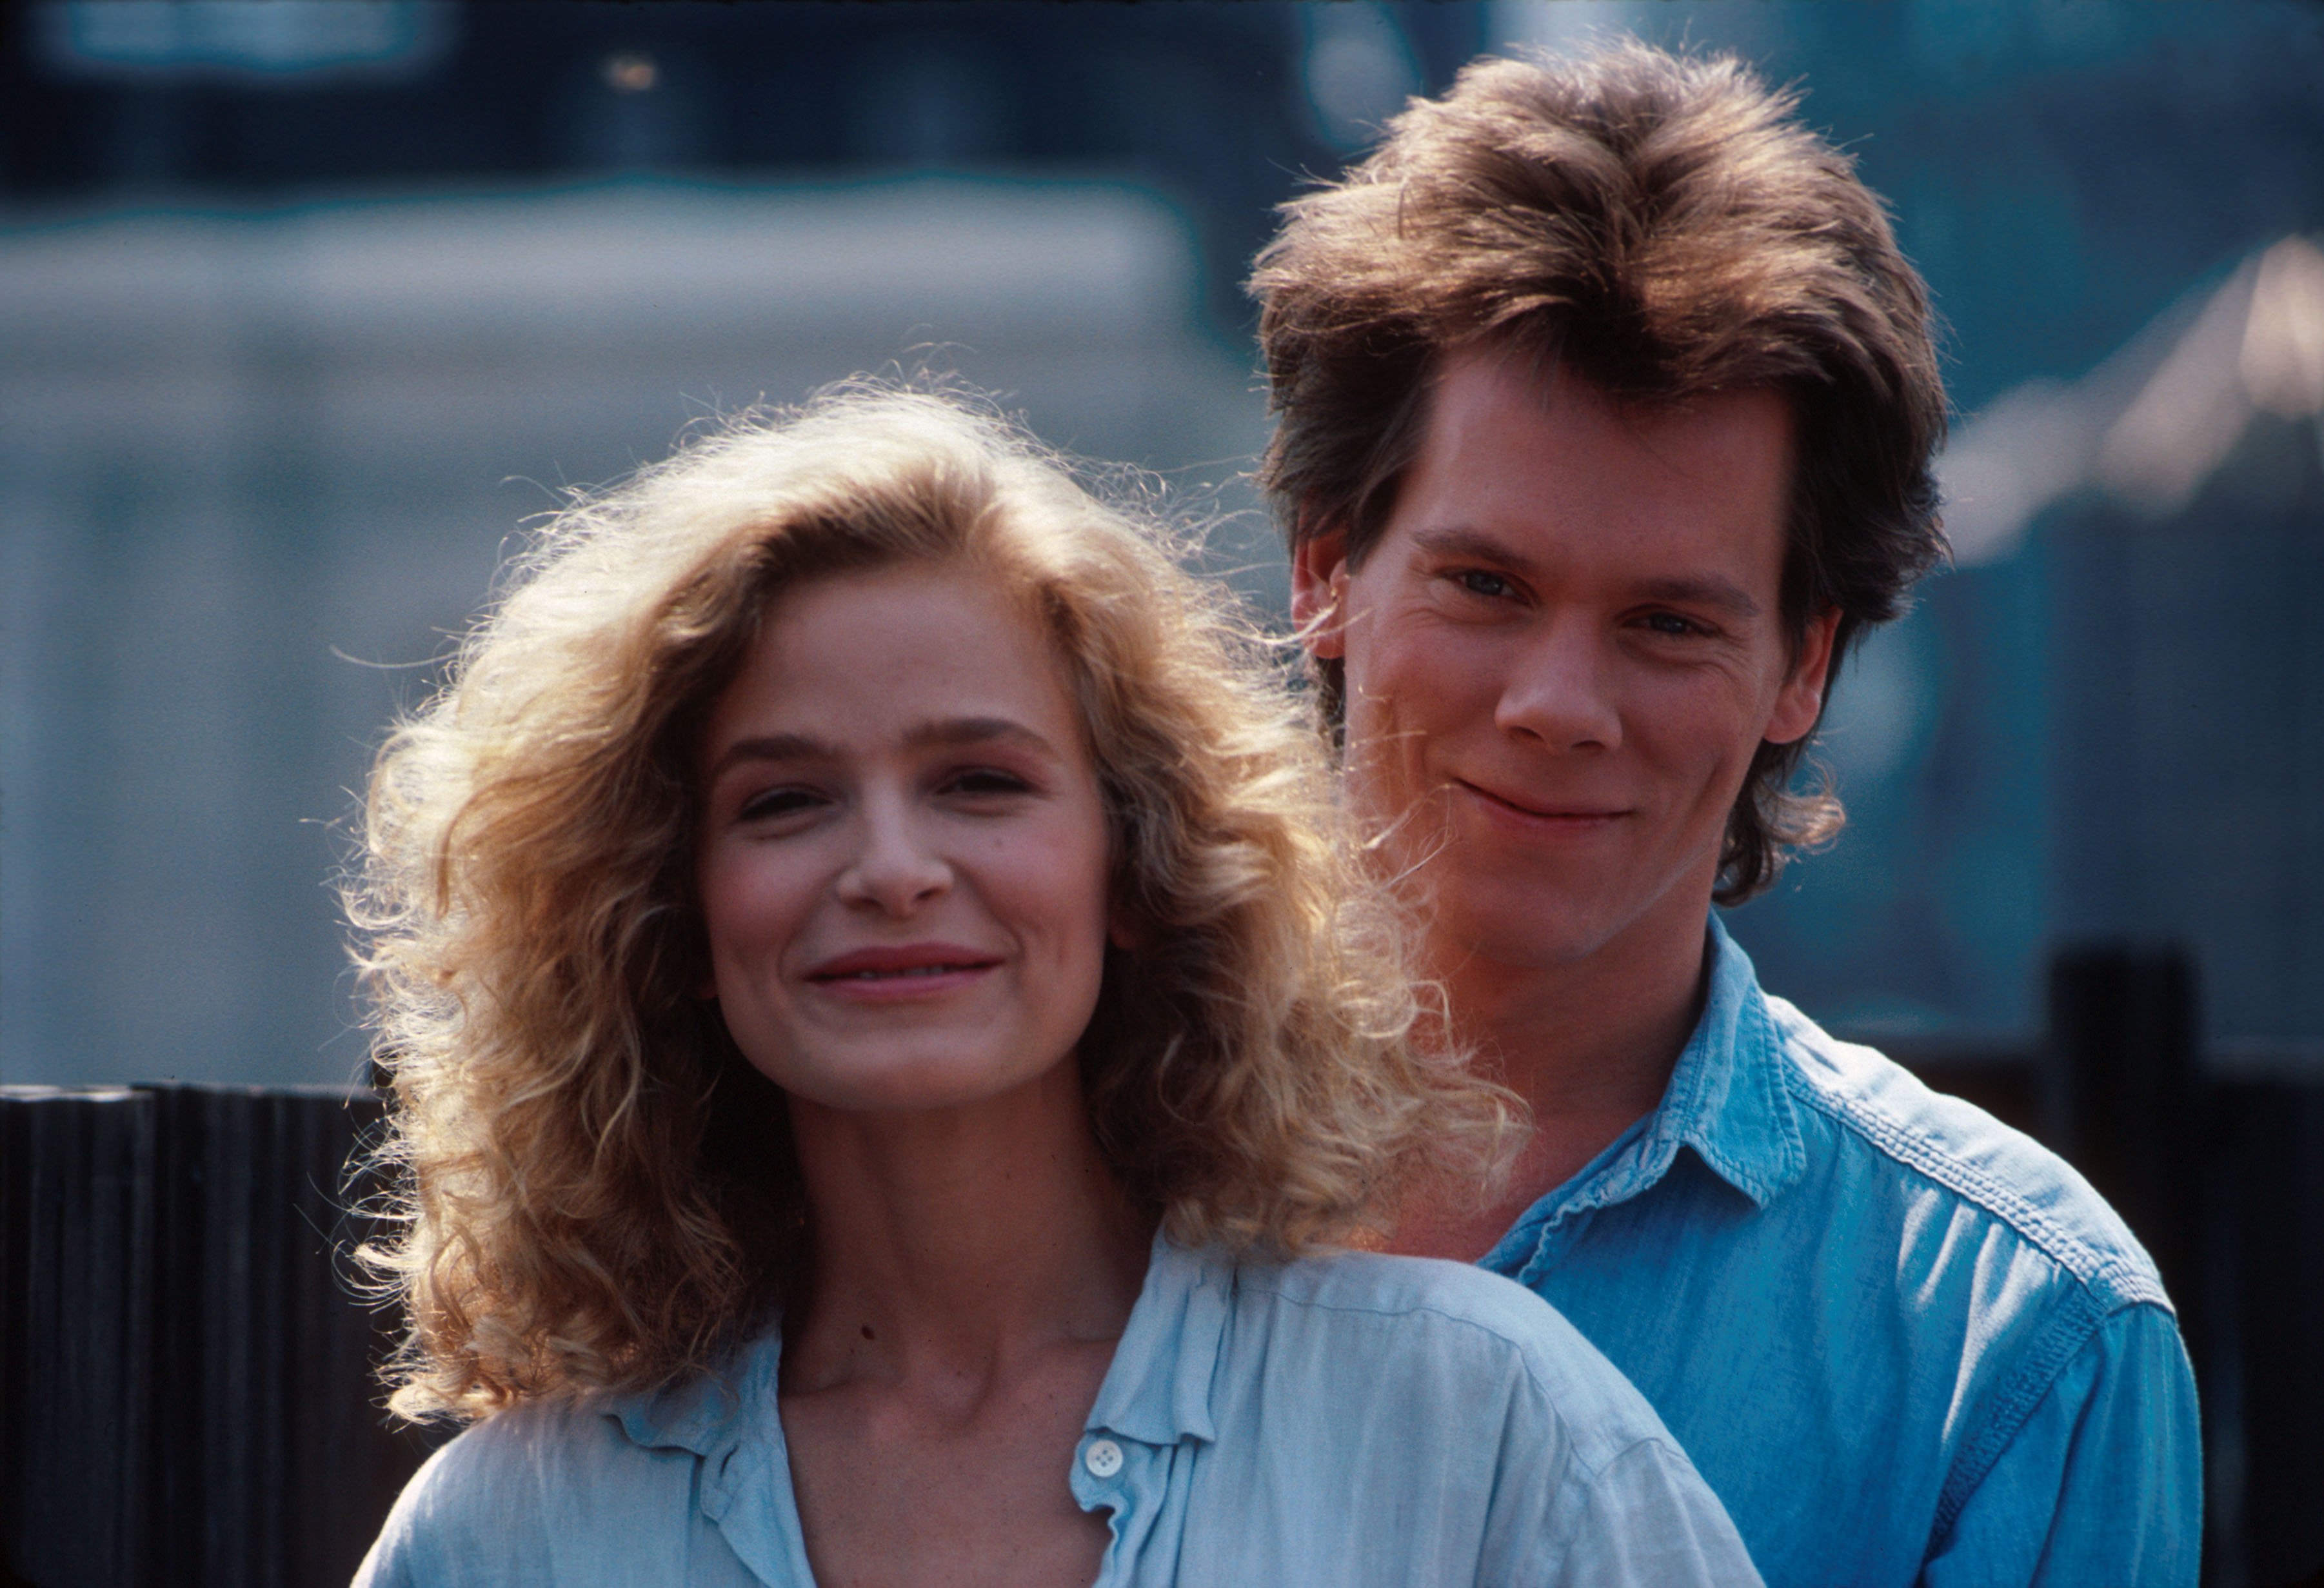 Junge Kevin Bacon und Kyra Sedgwick | Quelle: Getty Images